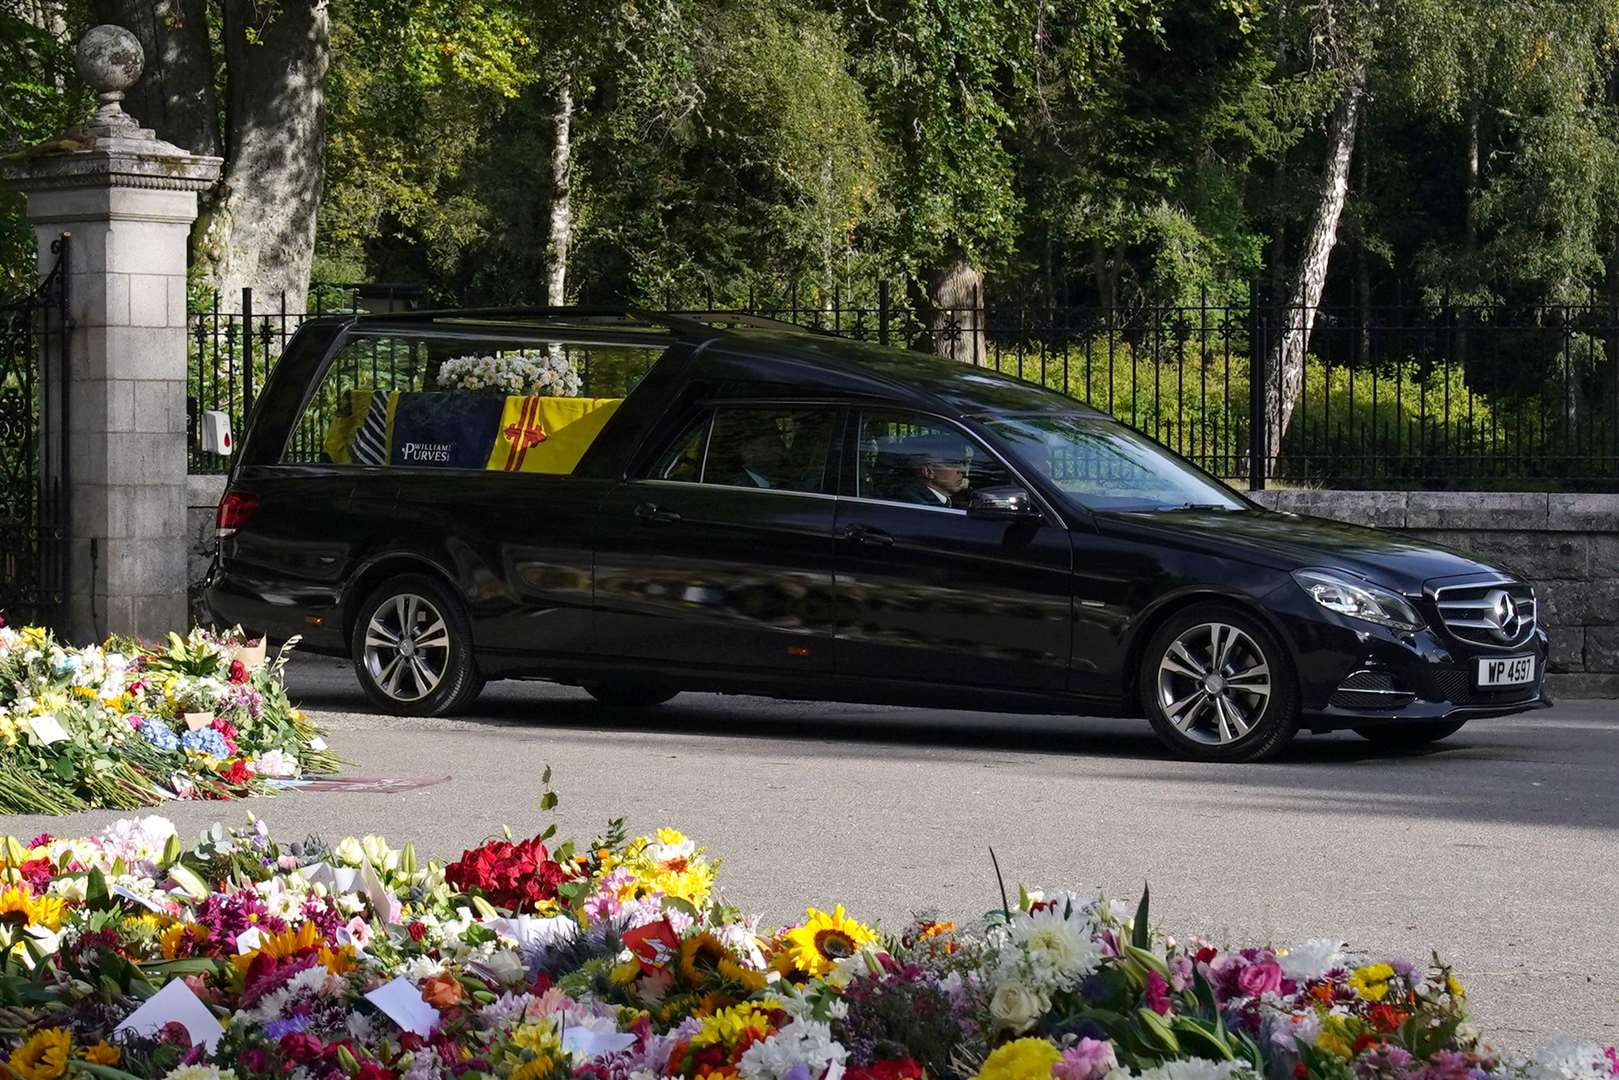 The hearse carrying the coffin of Queen Elizabeth II left Balmoral on Sunday morning (Owen Humphreys/PA)